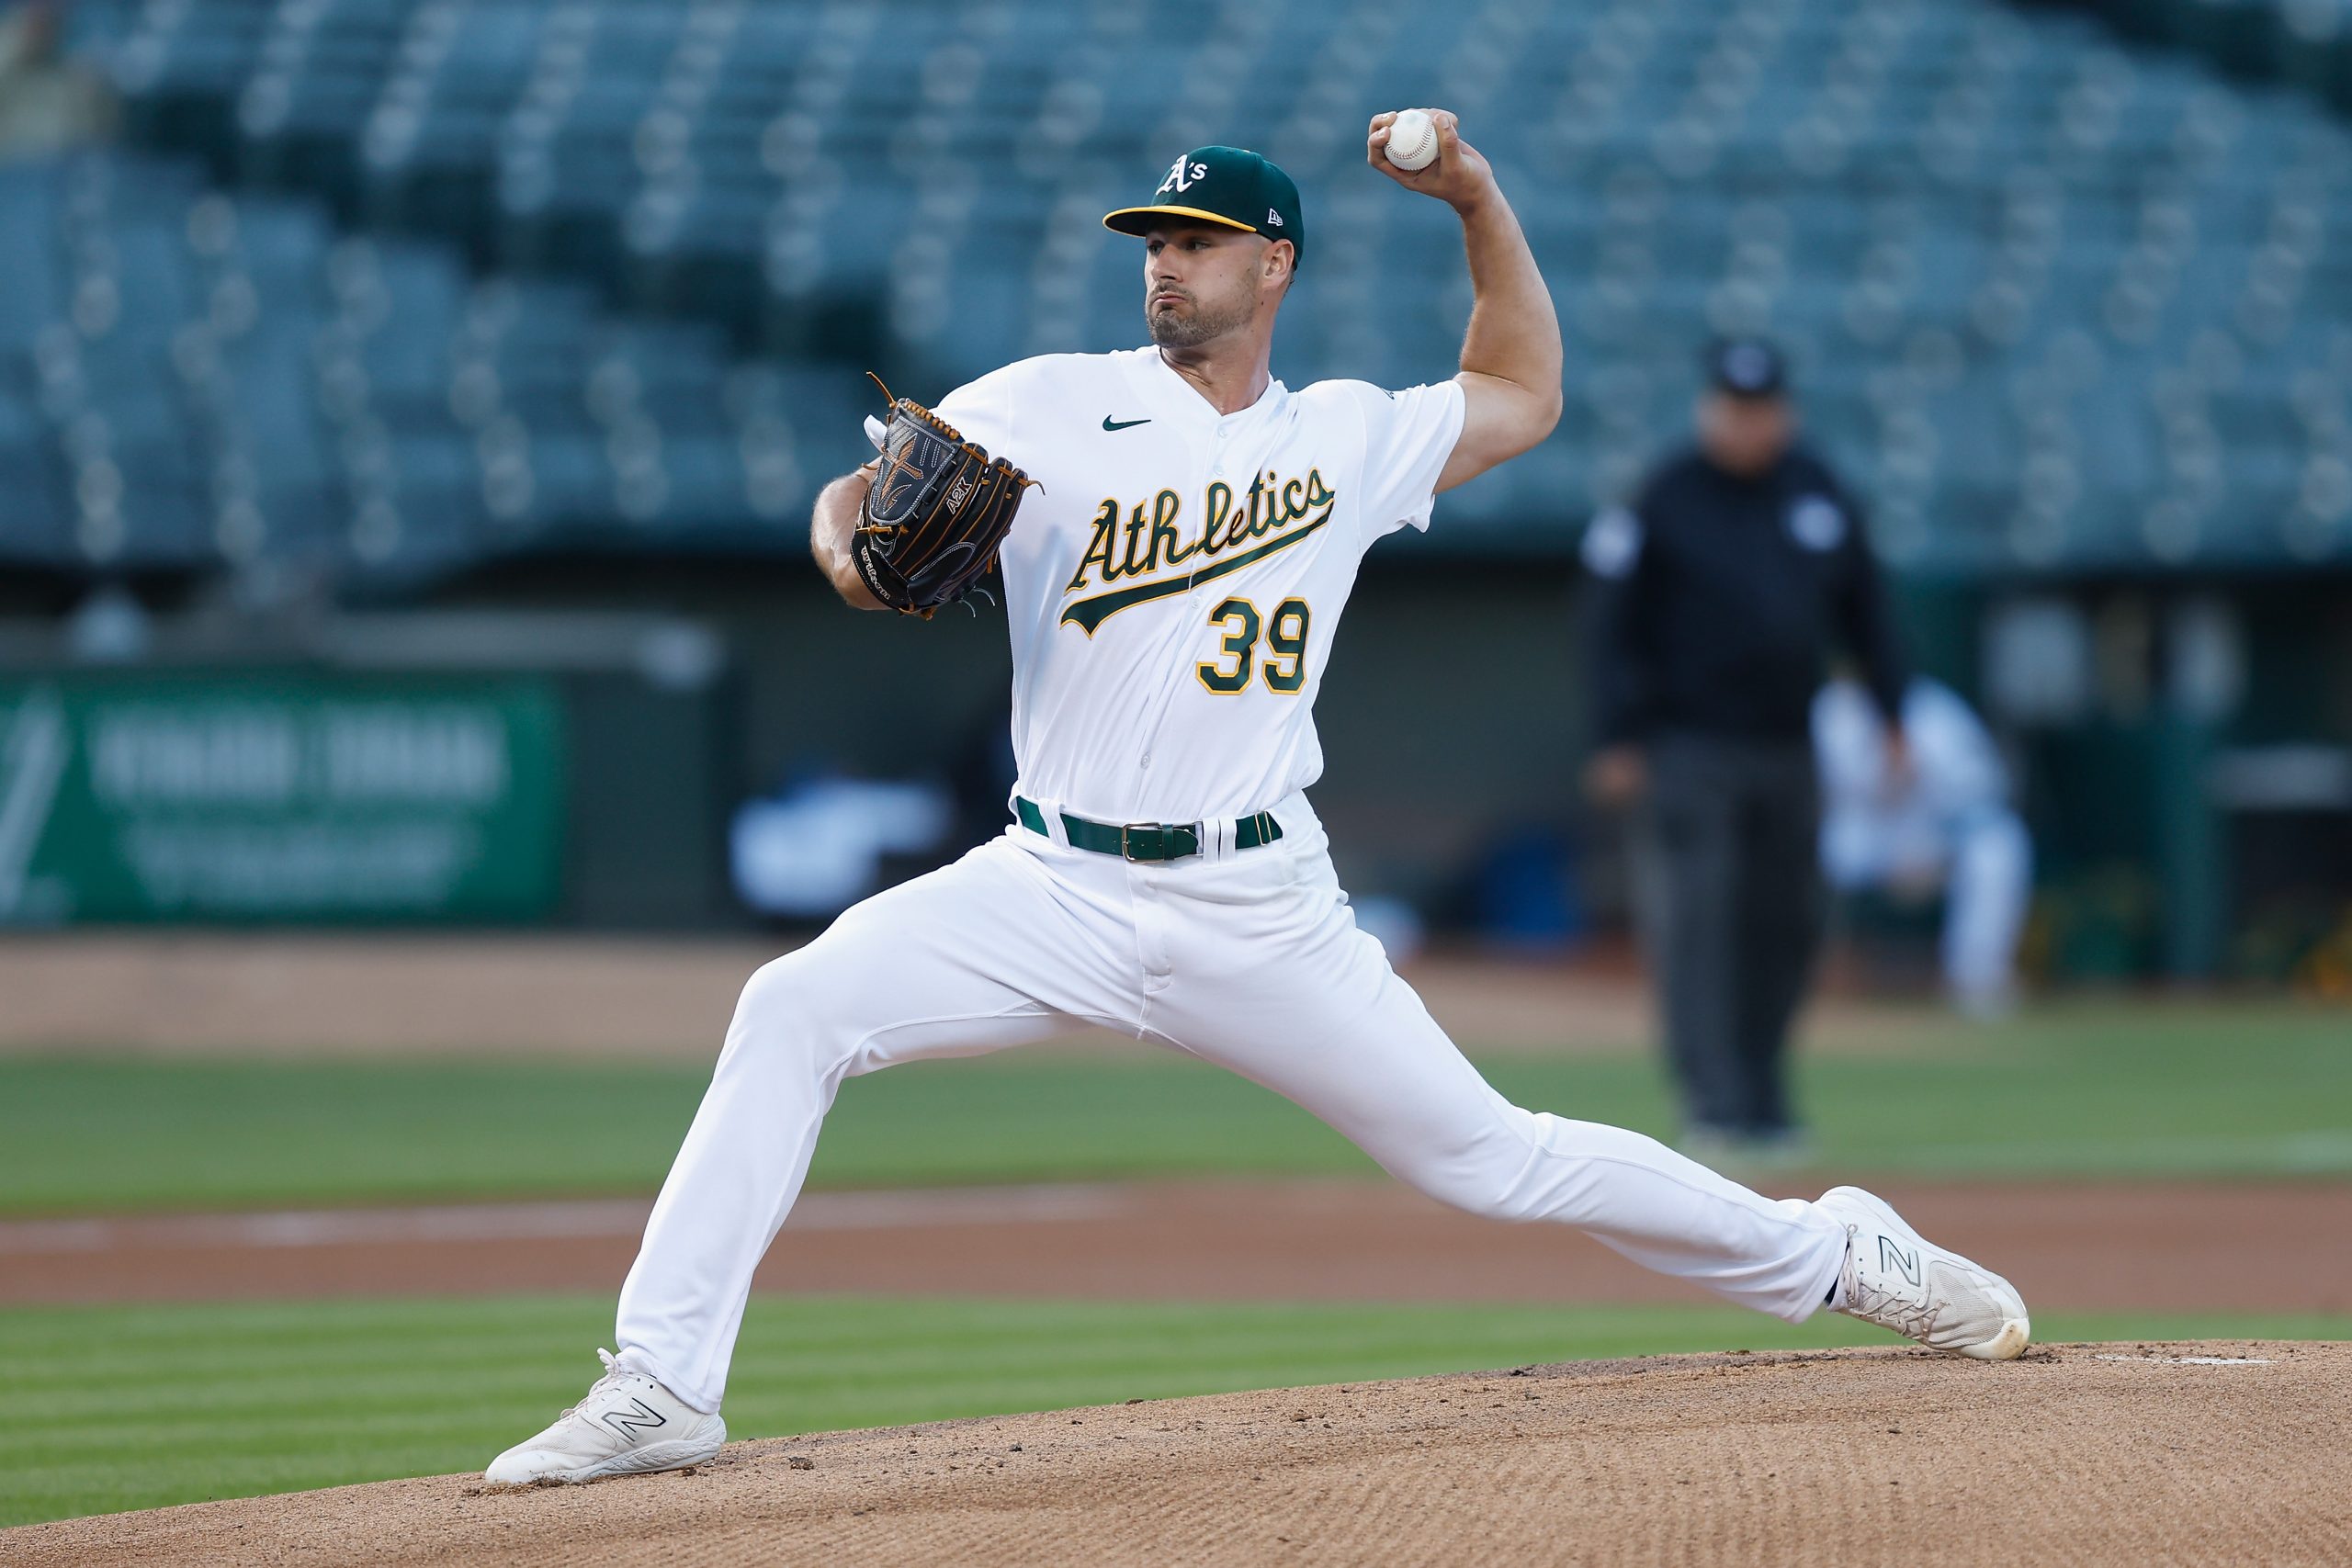 Kyle Muller #39 of the Oakland A's pitches in the top of the first inning against the Arizona Diamo...